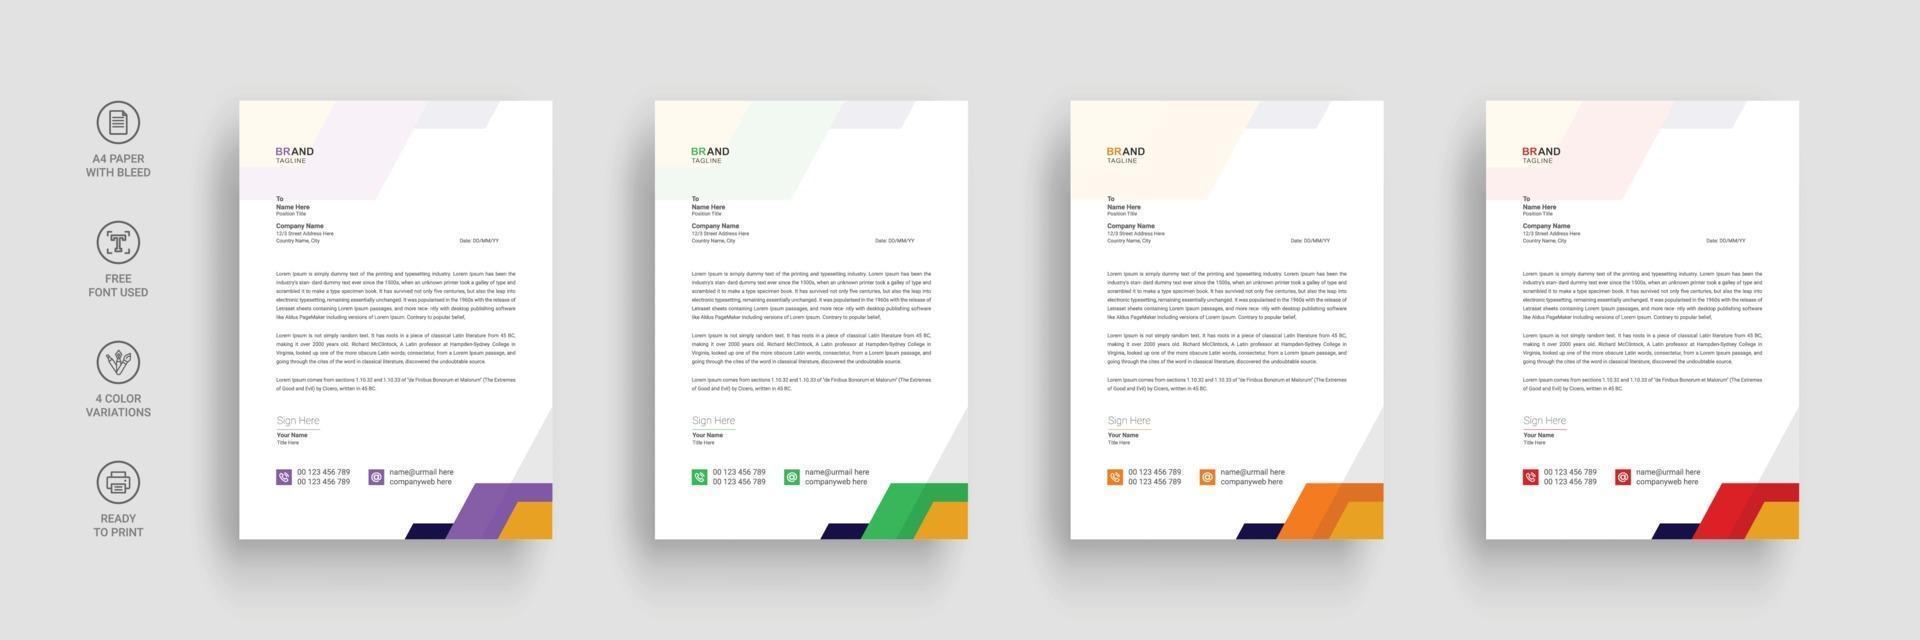 Corporate business letterhead in flat style vector